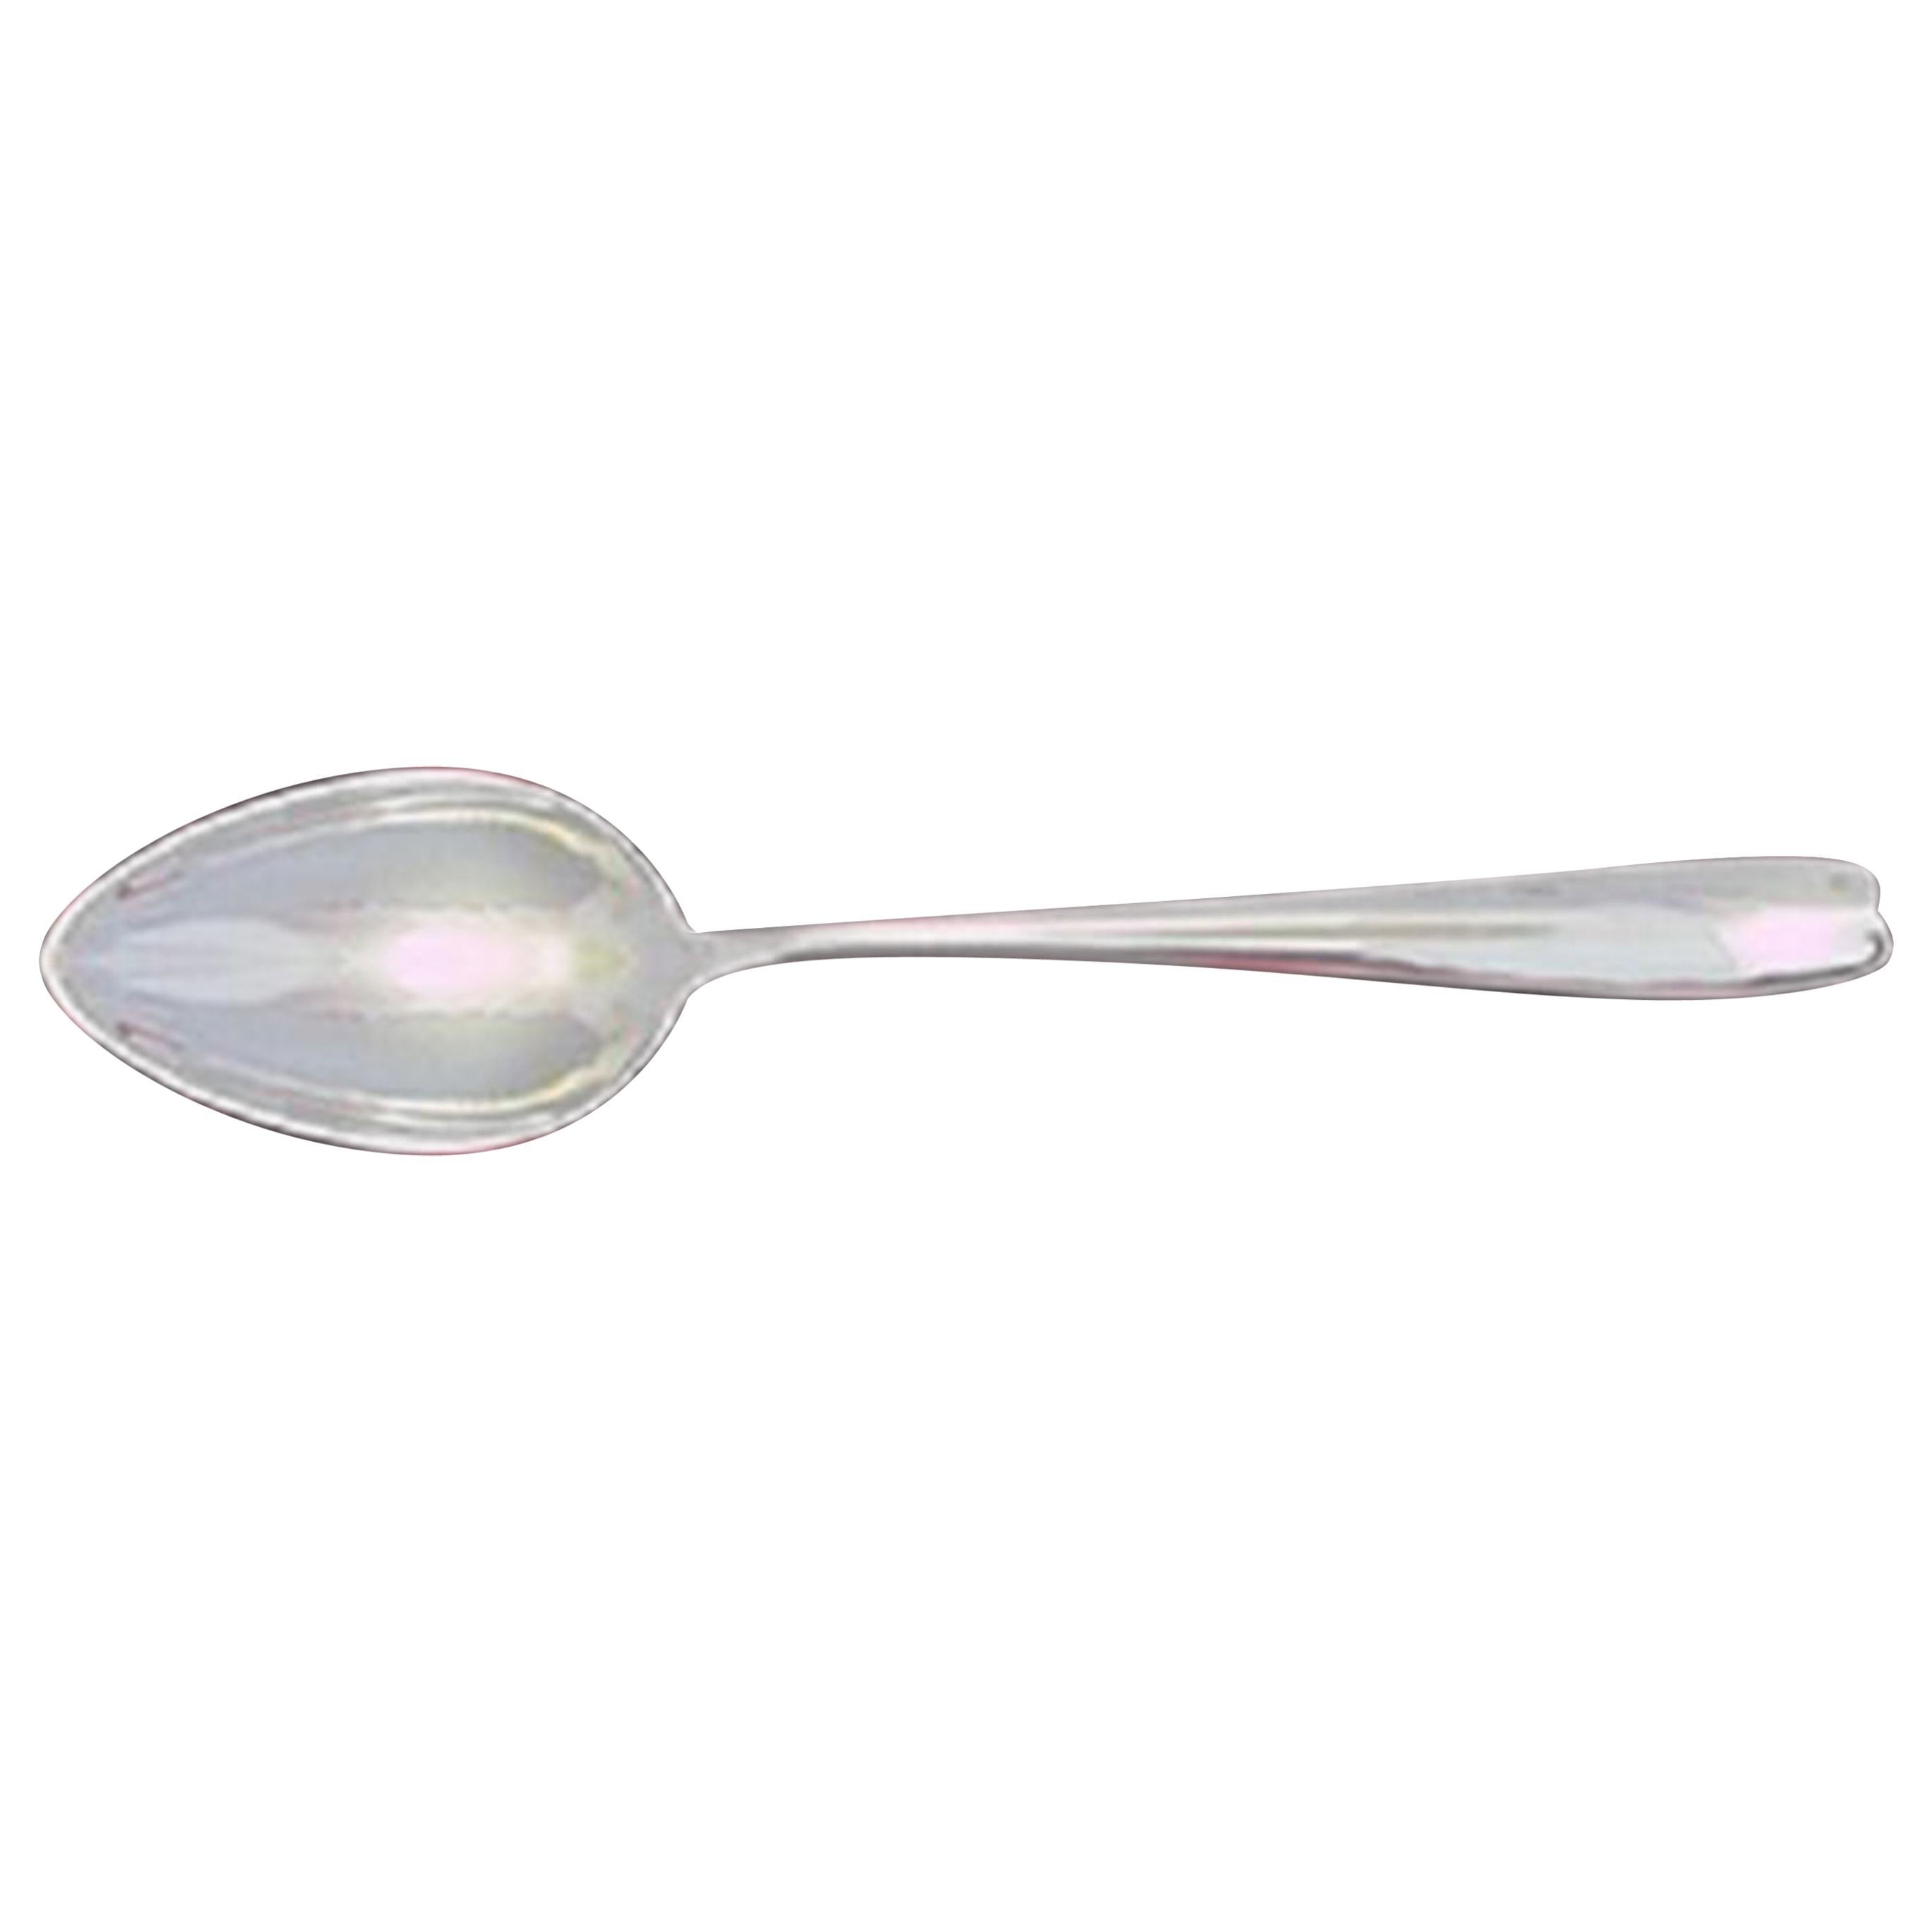 Cordis by Tiffany & Co. Sterling Silver Demitasse Spoon